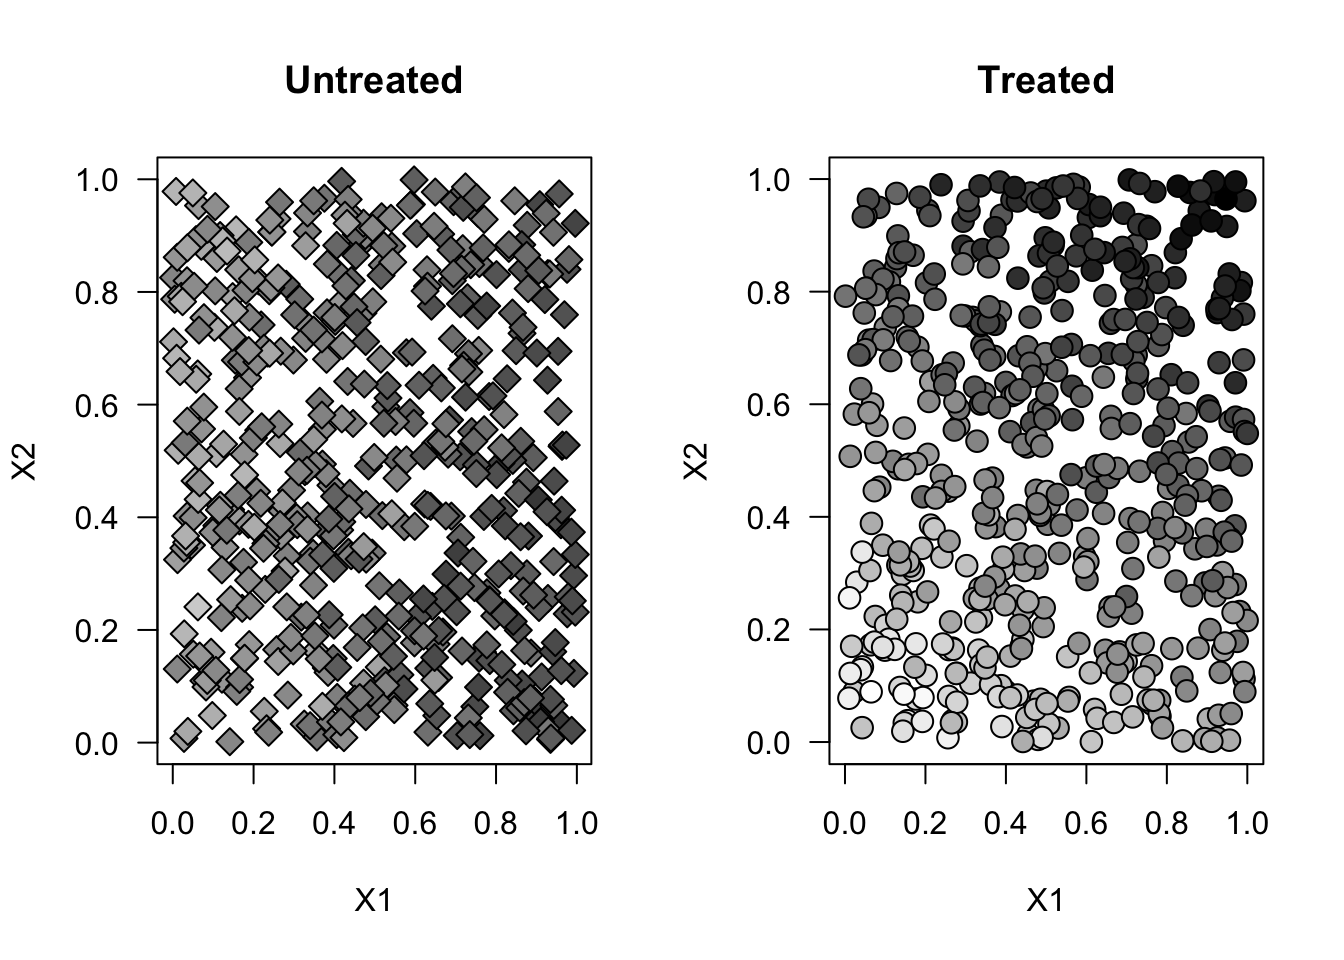 Simulated data by treated and untreated (randomized setting)